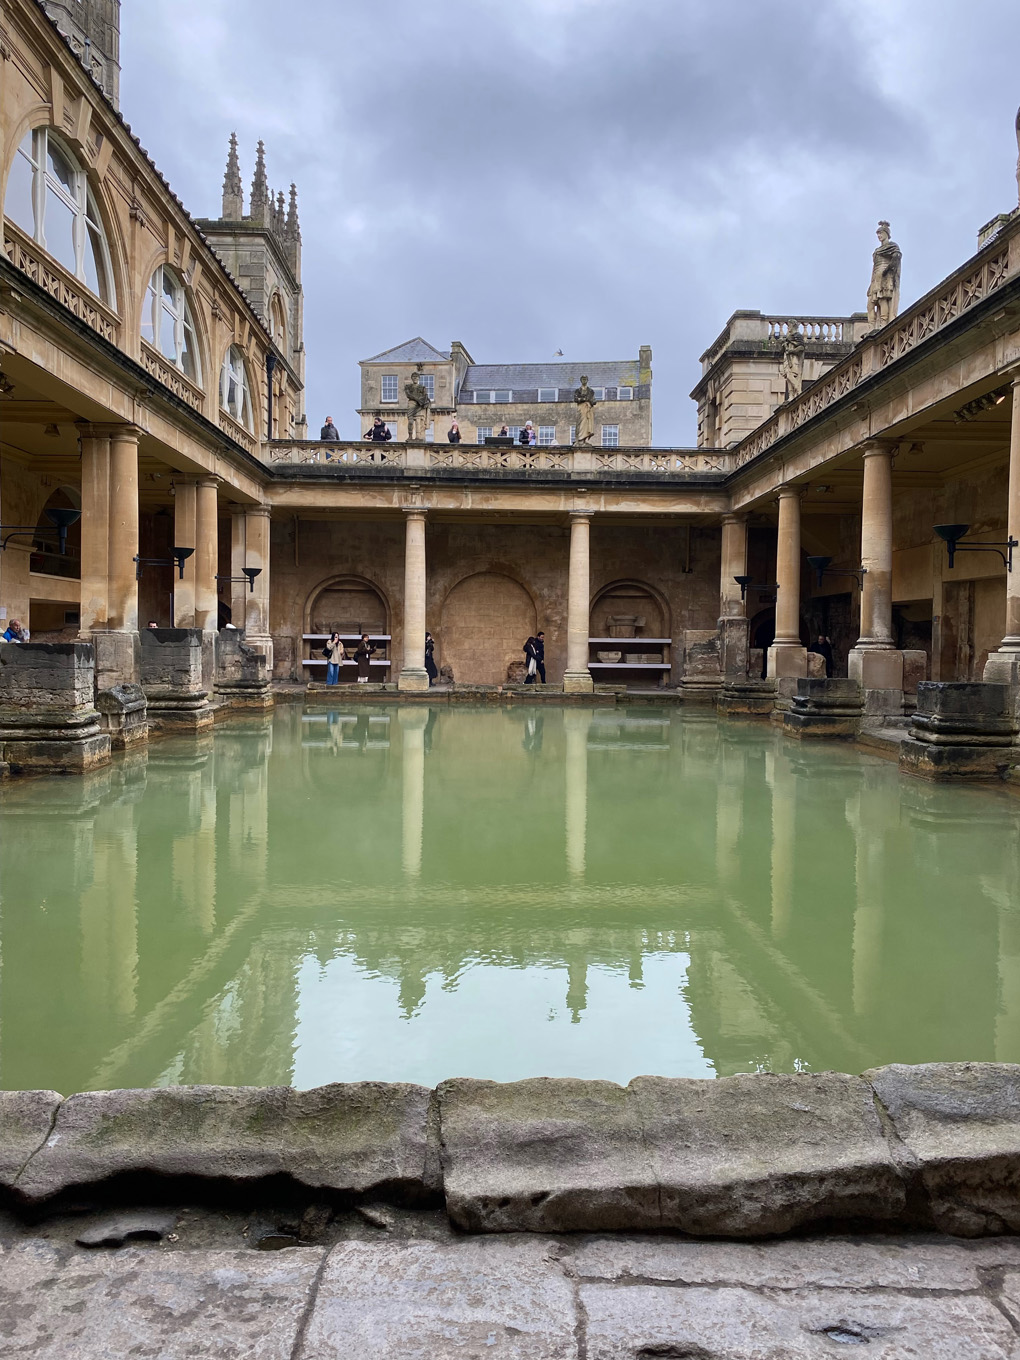 A view of the main bath at the Roman Baths in Bath. A rectangular pool of reflective greenish water is framed by sandstone collonades, pediments and statues of Romans. More sandstone buildings are looming in the background in front of a cloudy sky. A few tourists are standing under and above the collonades looking at the bath.